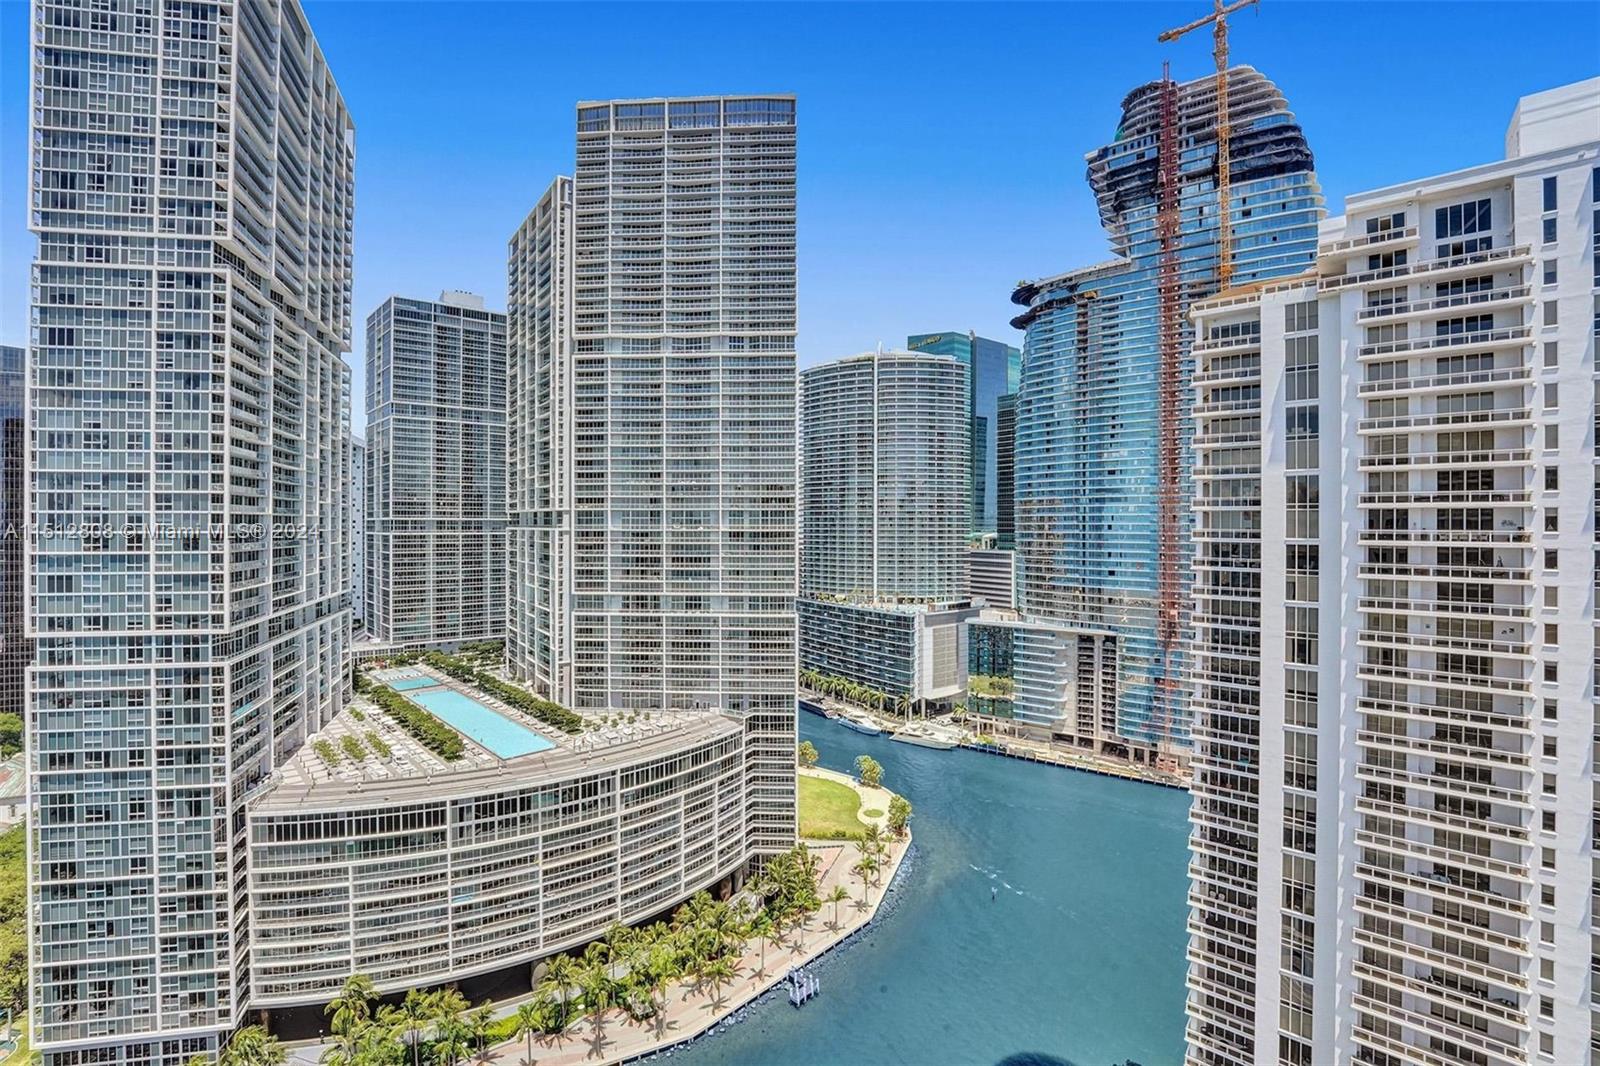 Spectacular view on this 3 bedrooms 3 FULL bathrooms in THE COURTS AT Brickell Key!! Enjoy the panoramic city and water views, one-of-a-kind, MARBLE FLOORS THROUGHOUT, large remodeled kitchen with stainless steel appliances, 2 ASSIGNED COVERED parking spaces (side-by-side) and ONE STORAGE. LOW MAINTENANCE! FULL RESERVES BUILDING. Brickell Key is the most exclusive private urban island in Miami! This unit is perfect for living and entertaining. Full-service and excellent managed building with low maintenance and great reserves. Enjoy the building's amenities: pool, gym, party room, business room, children's playroom, racquetball courts, bicycle spinning room, and more. MUST SEE!